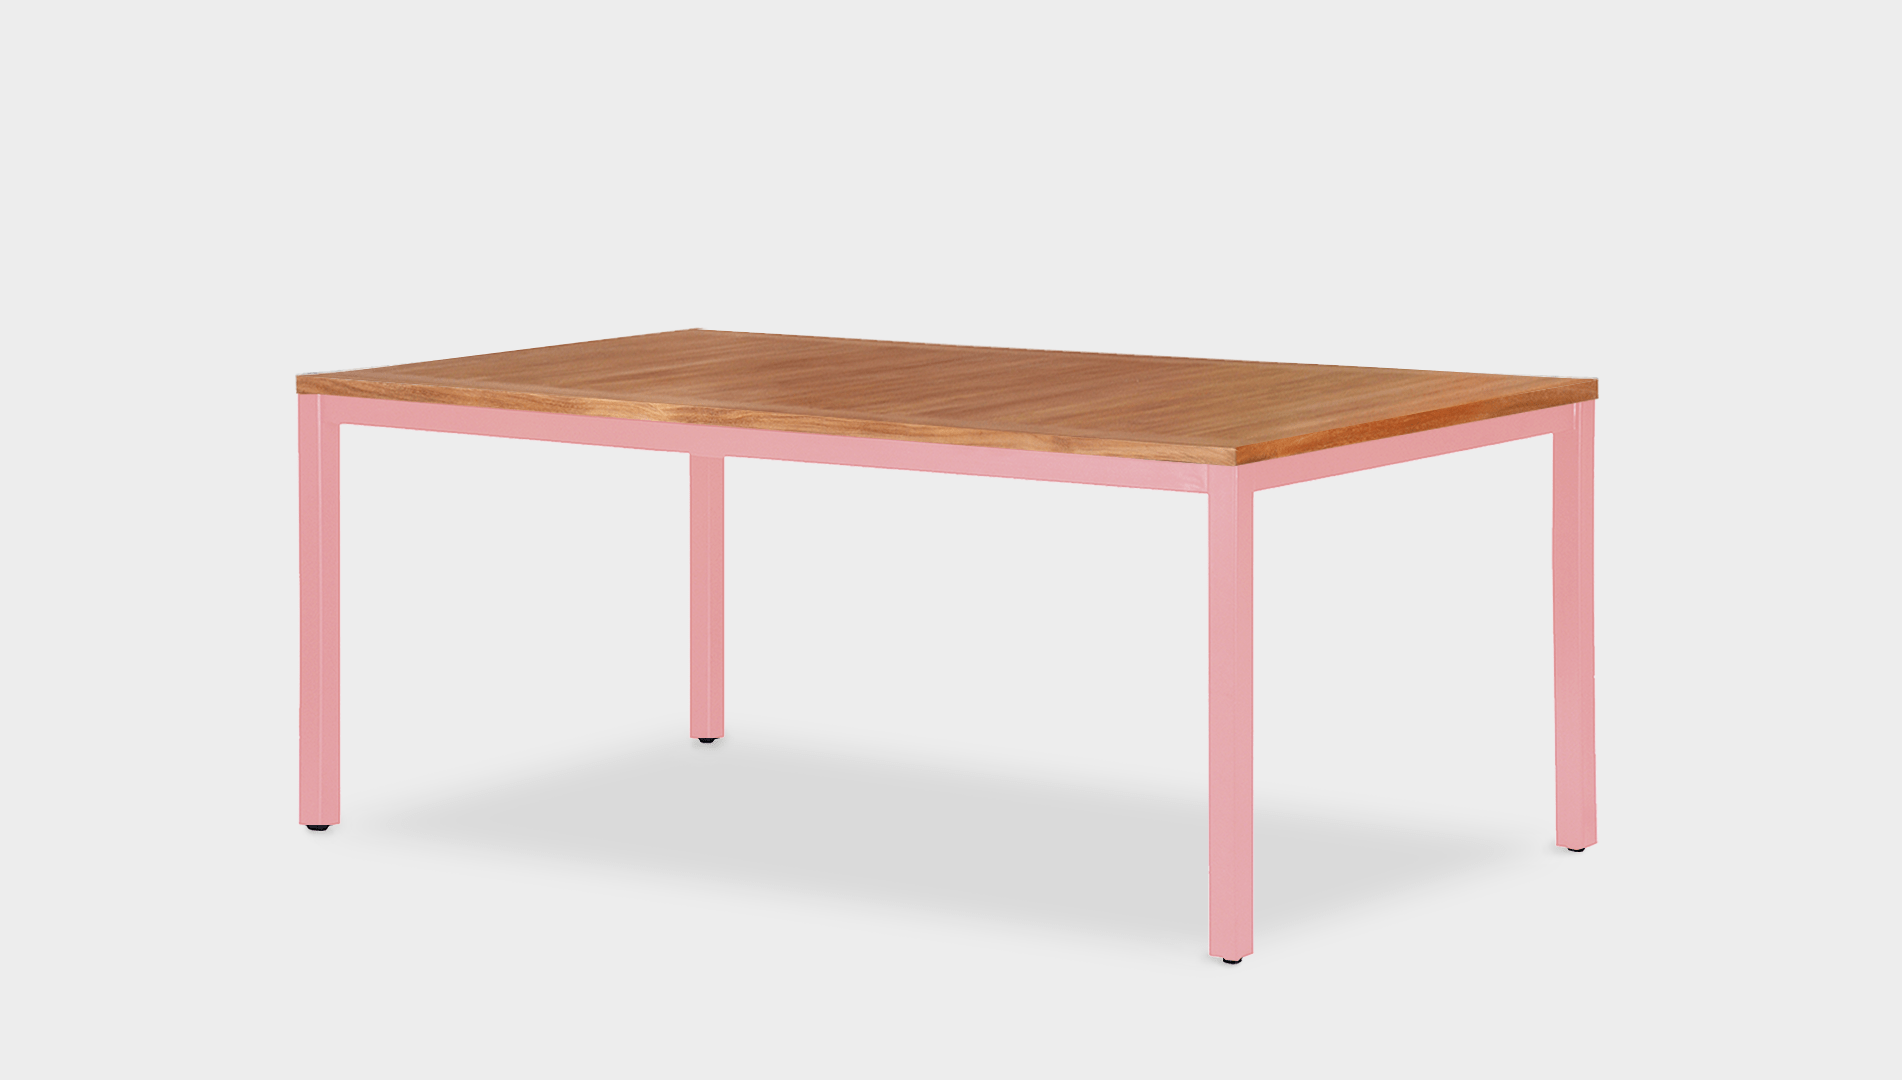 reddie-raw outdoor dining table rectangle 240W x 100D x 75H H *cm / Wood Teak~Natural / Metal~Pink Bob Outdoor Table